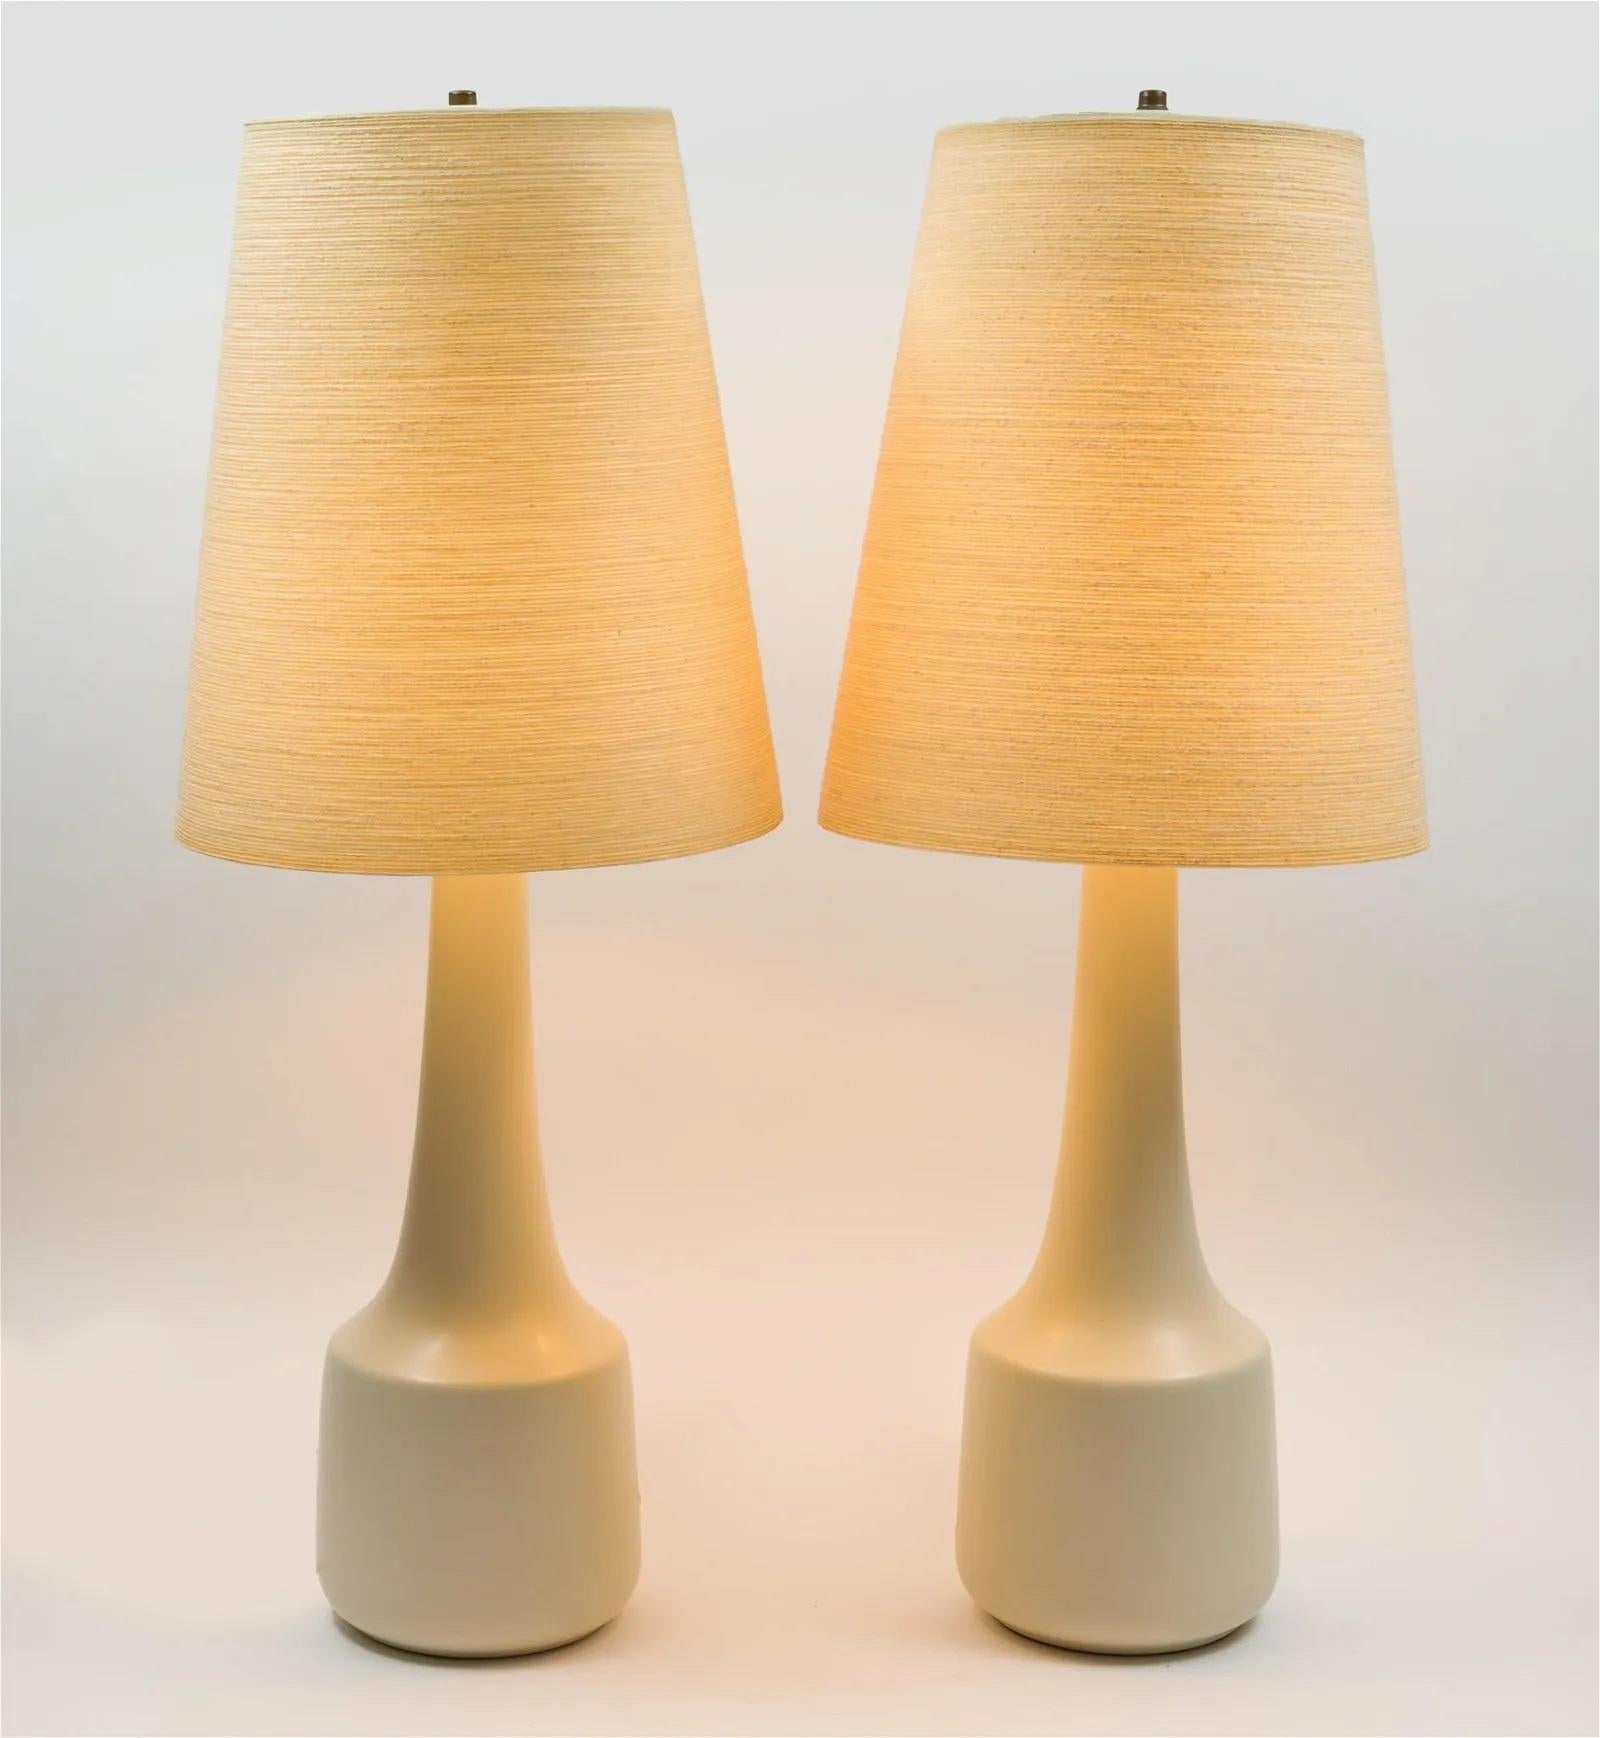 Pair of midcentury ceramic table lamps by Lotte and Gunnar Bostlund, with original jute lampshades. Circa 1970s. Canada.

Height: 36 in (86.36 cm) diameter: 7 ½ in (17.78 cm)

Shades : 16 in H x 14 in W.